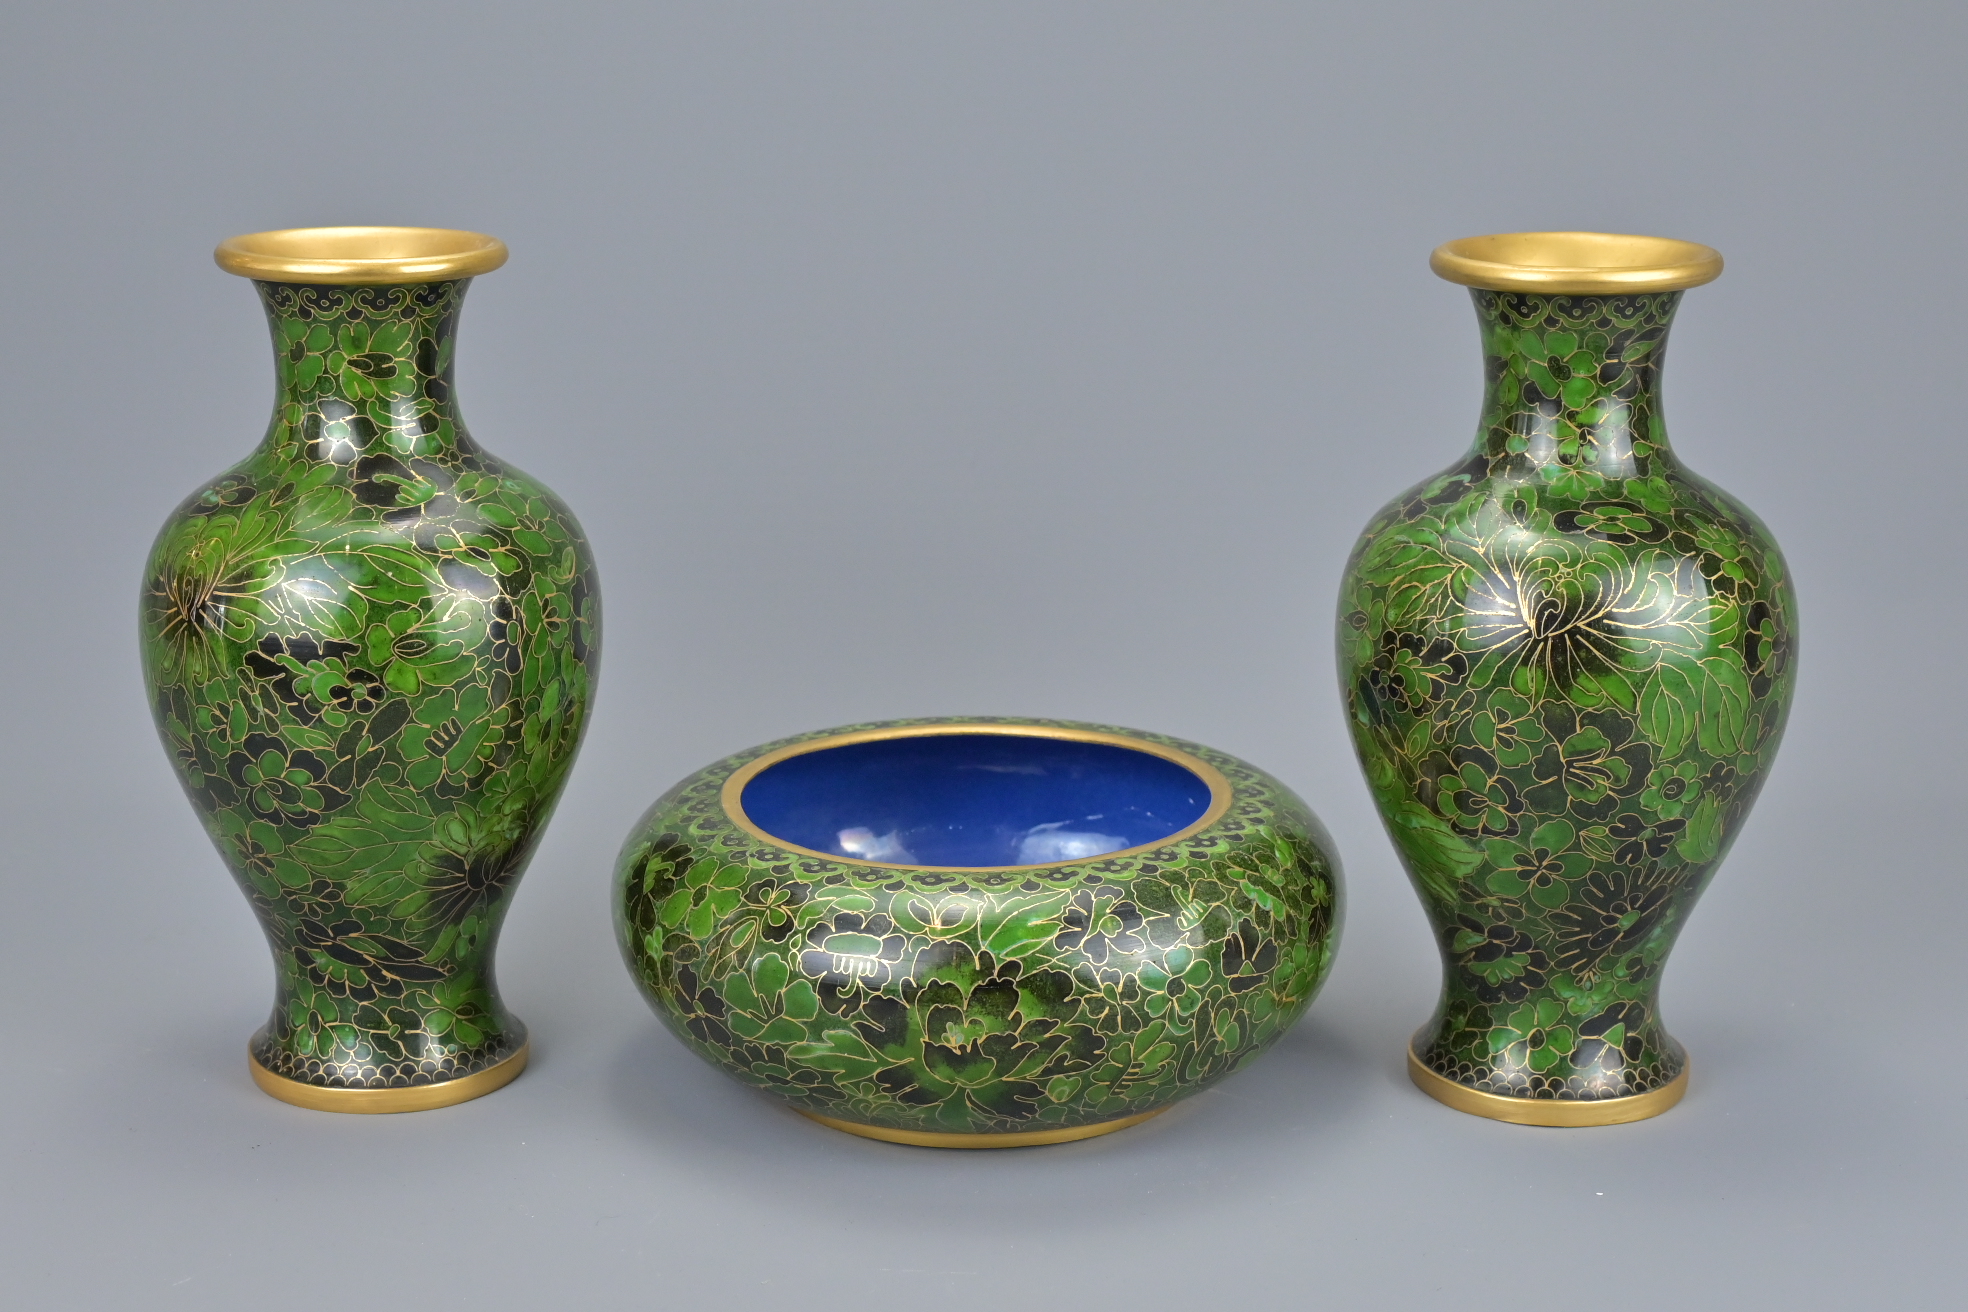 PAIR OF CHINESE CLOISONNE VASES - Image 2 of 4